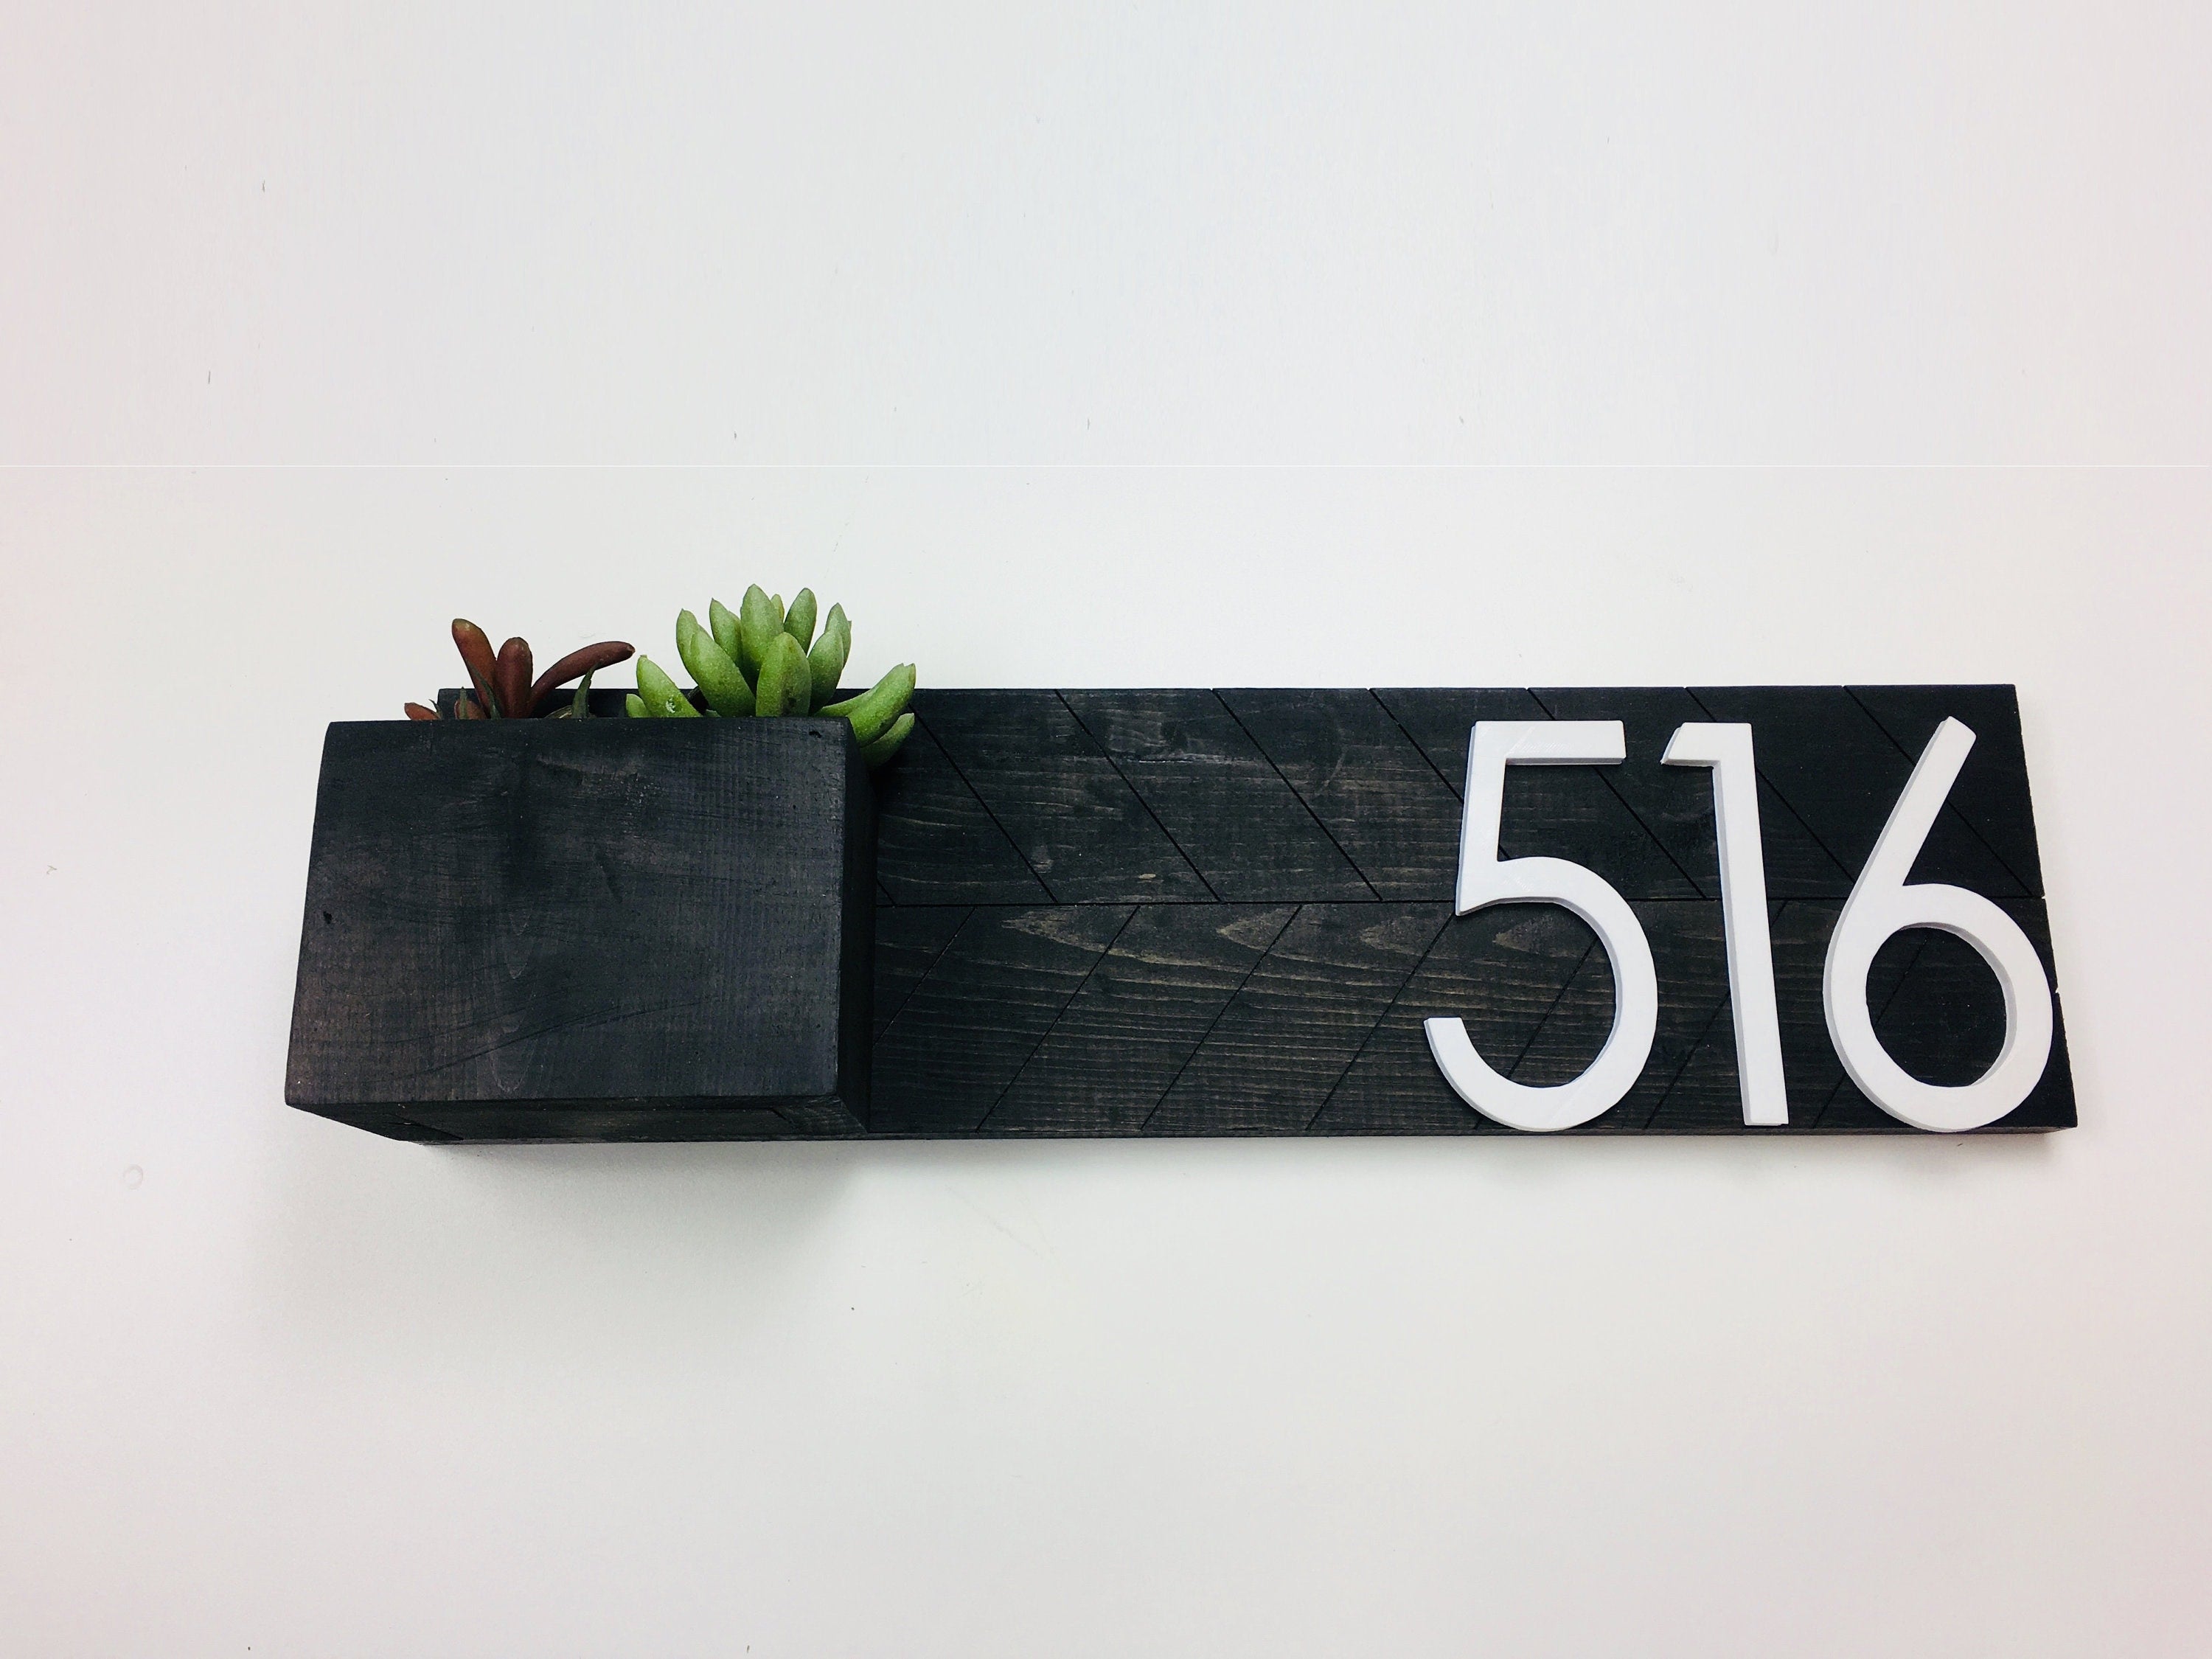 Teton Address Plaque with Planter, wood house number yard sign, Numbers Personalized House Numbers house number sign chevron horizontal